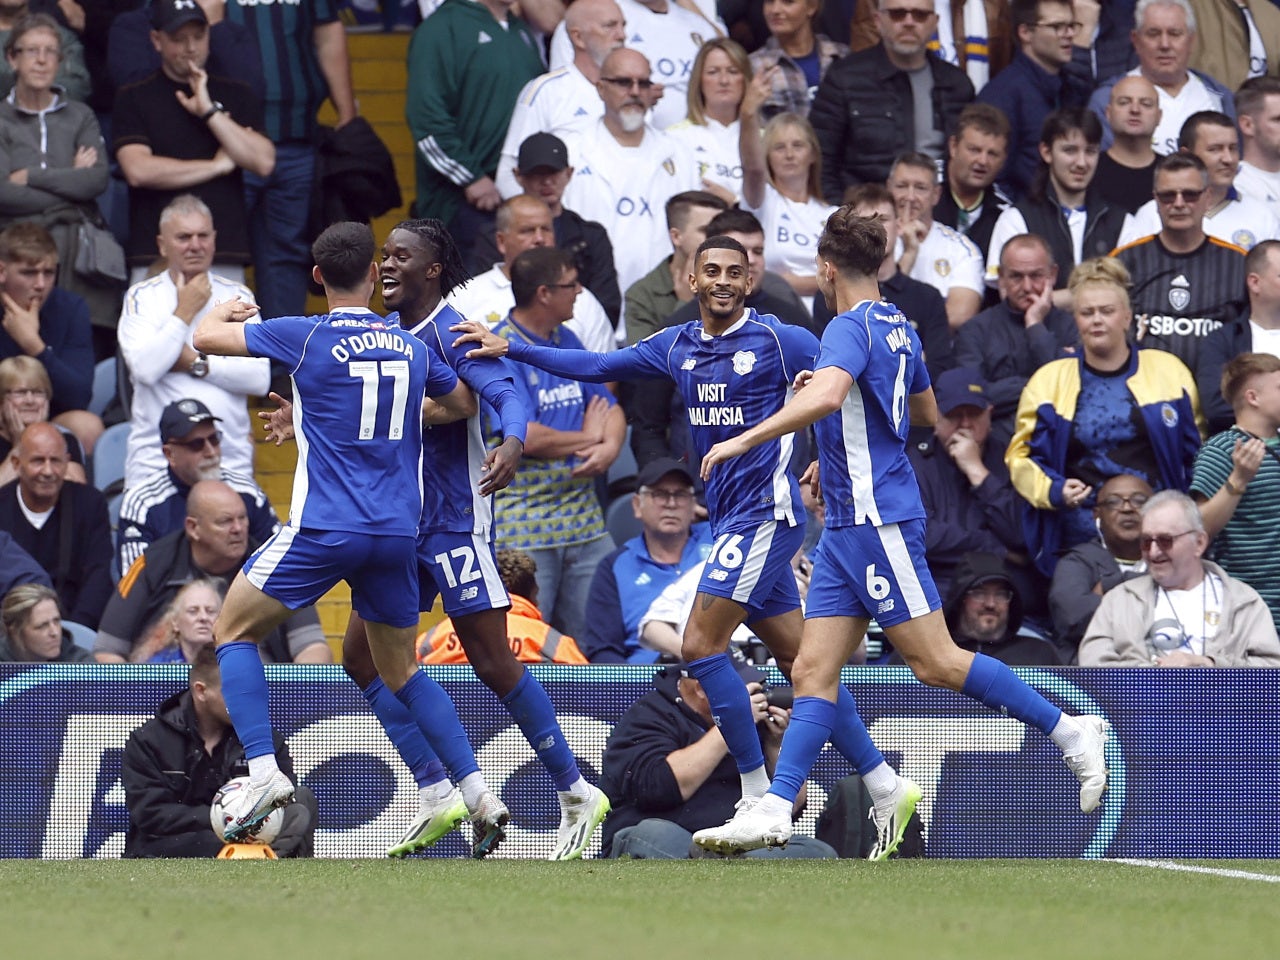 Cardiff City relegated: Bluebirds drop to the Championship after